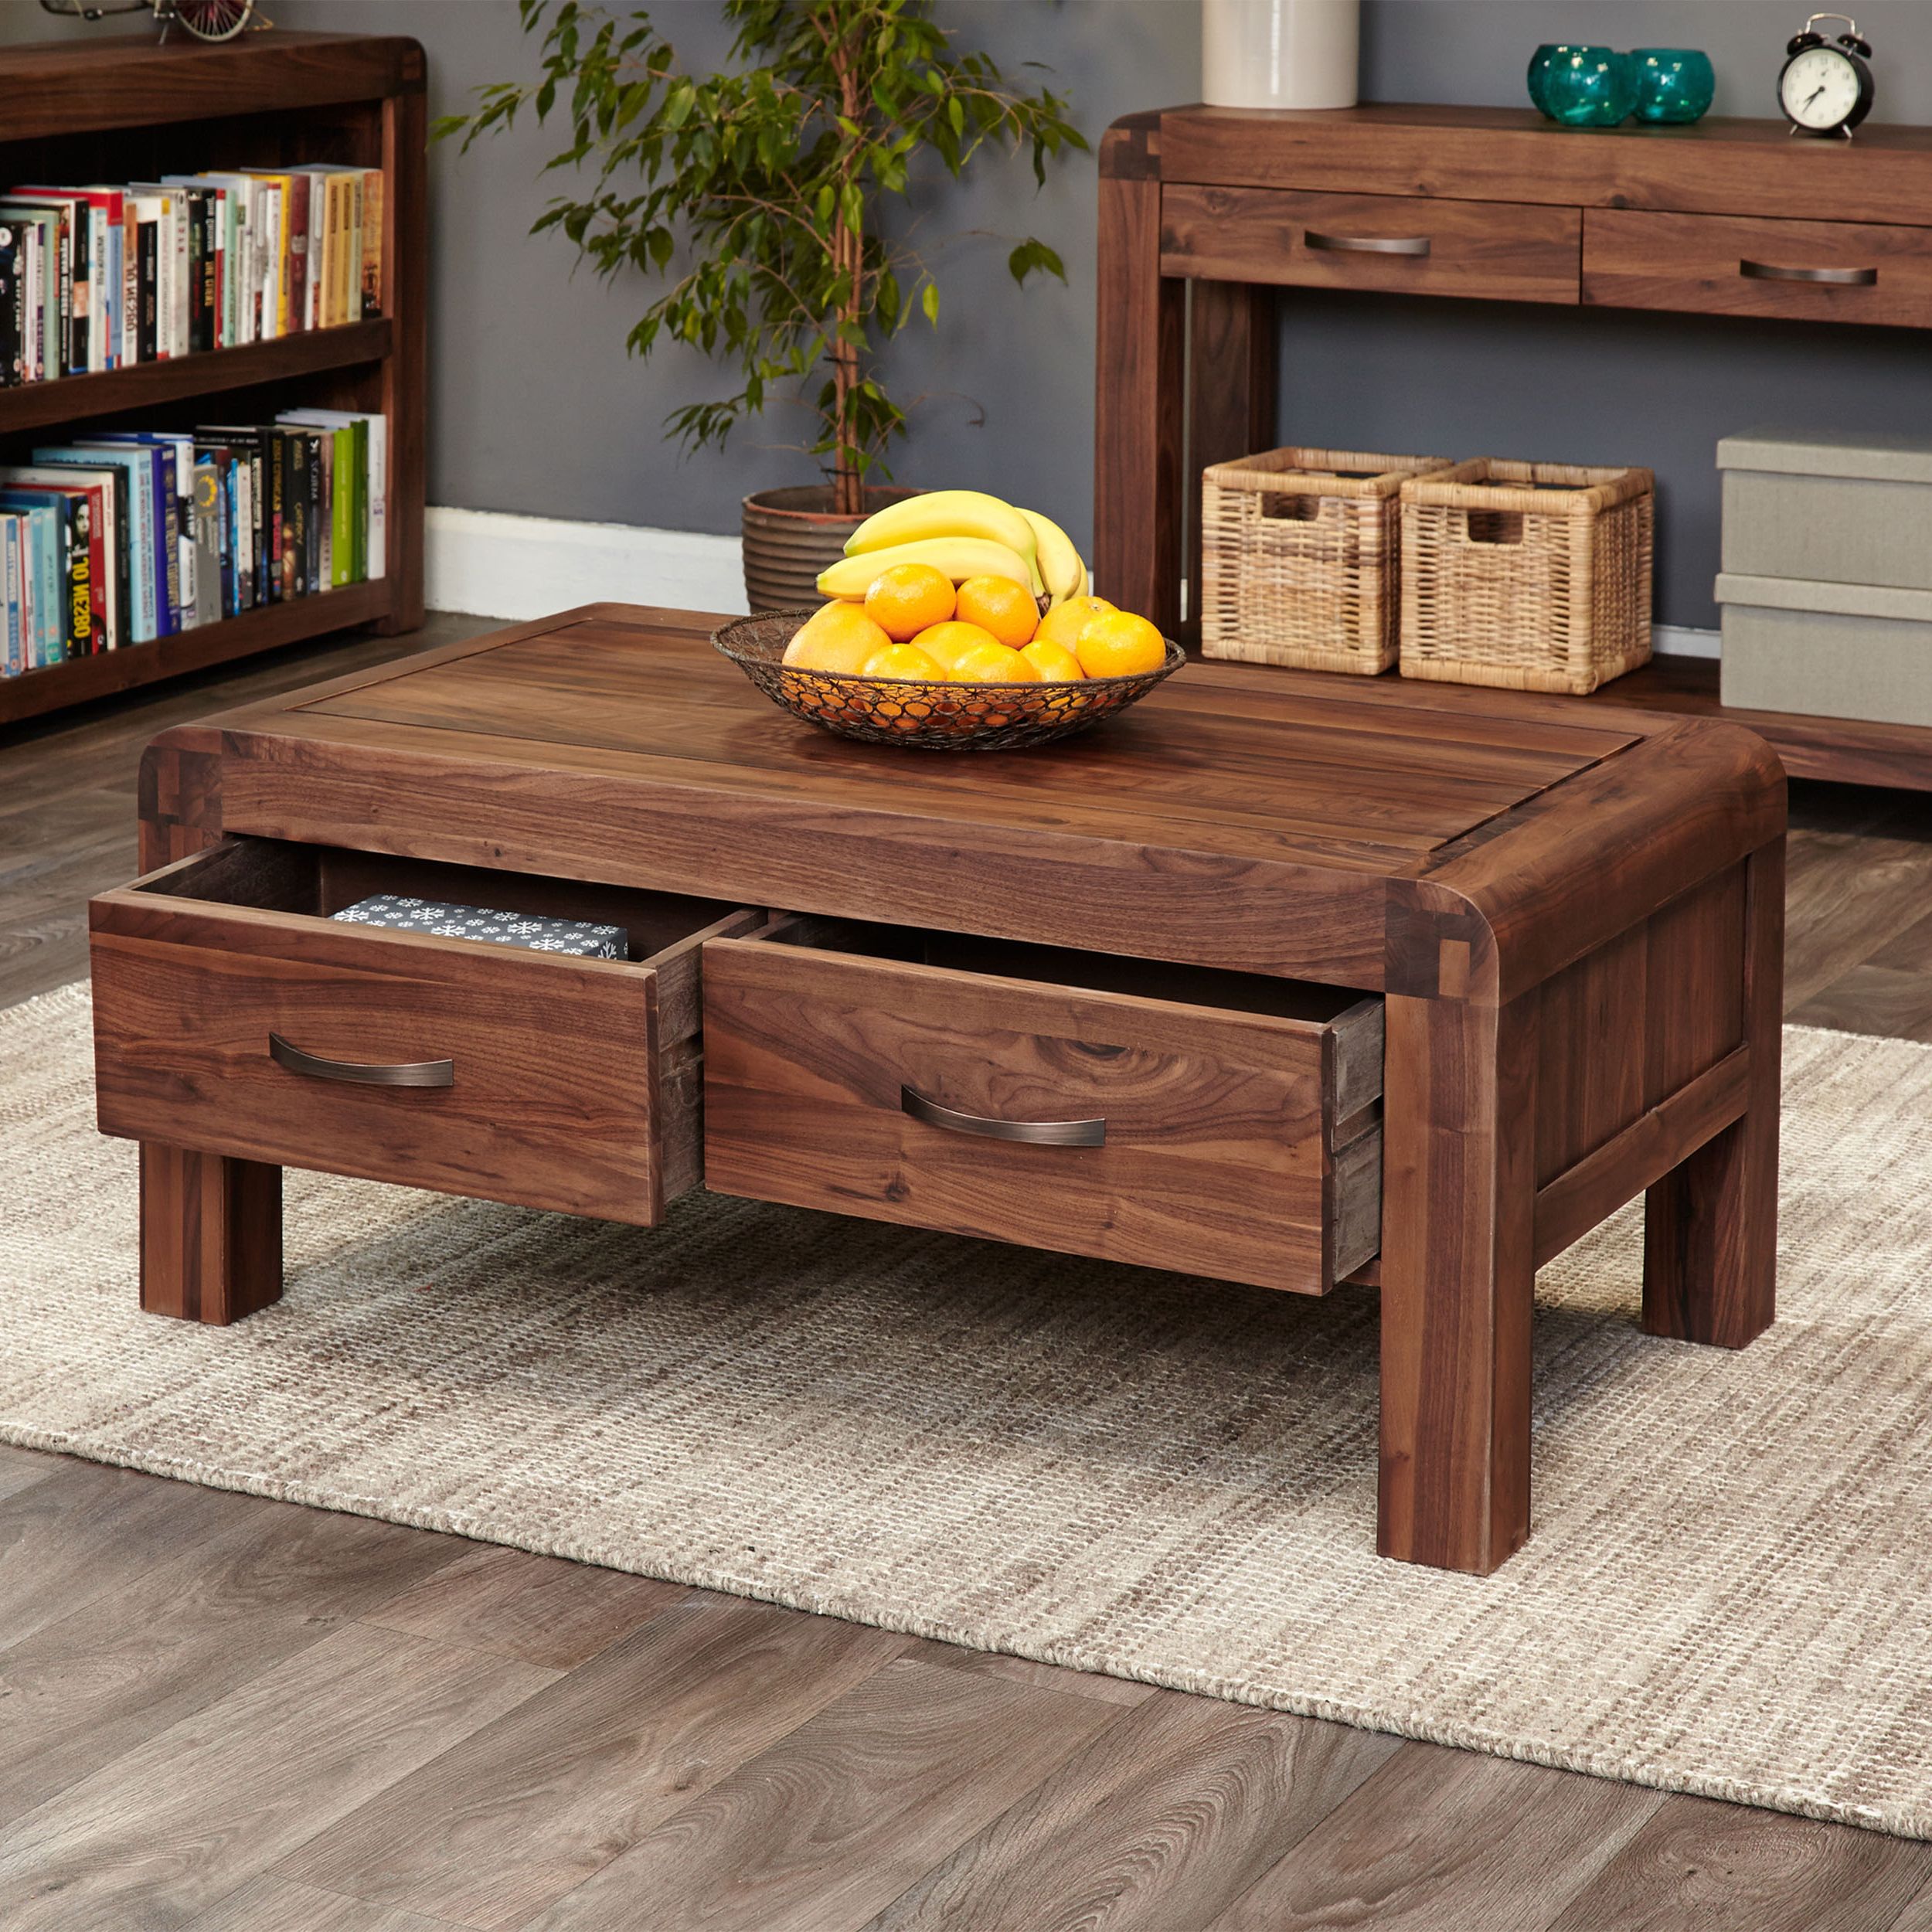 Latest Coffee Tables With Open Storage Shelves Within Solid Walnut Coffee Table With Storage – Shiro (View 3 of 15)